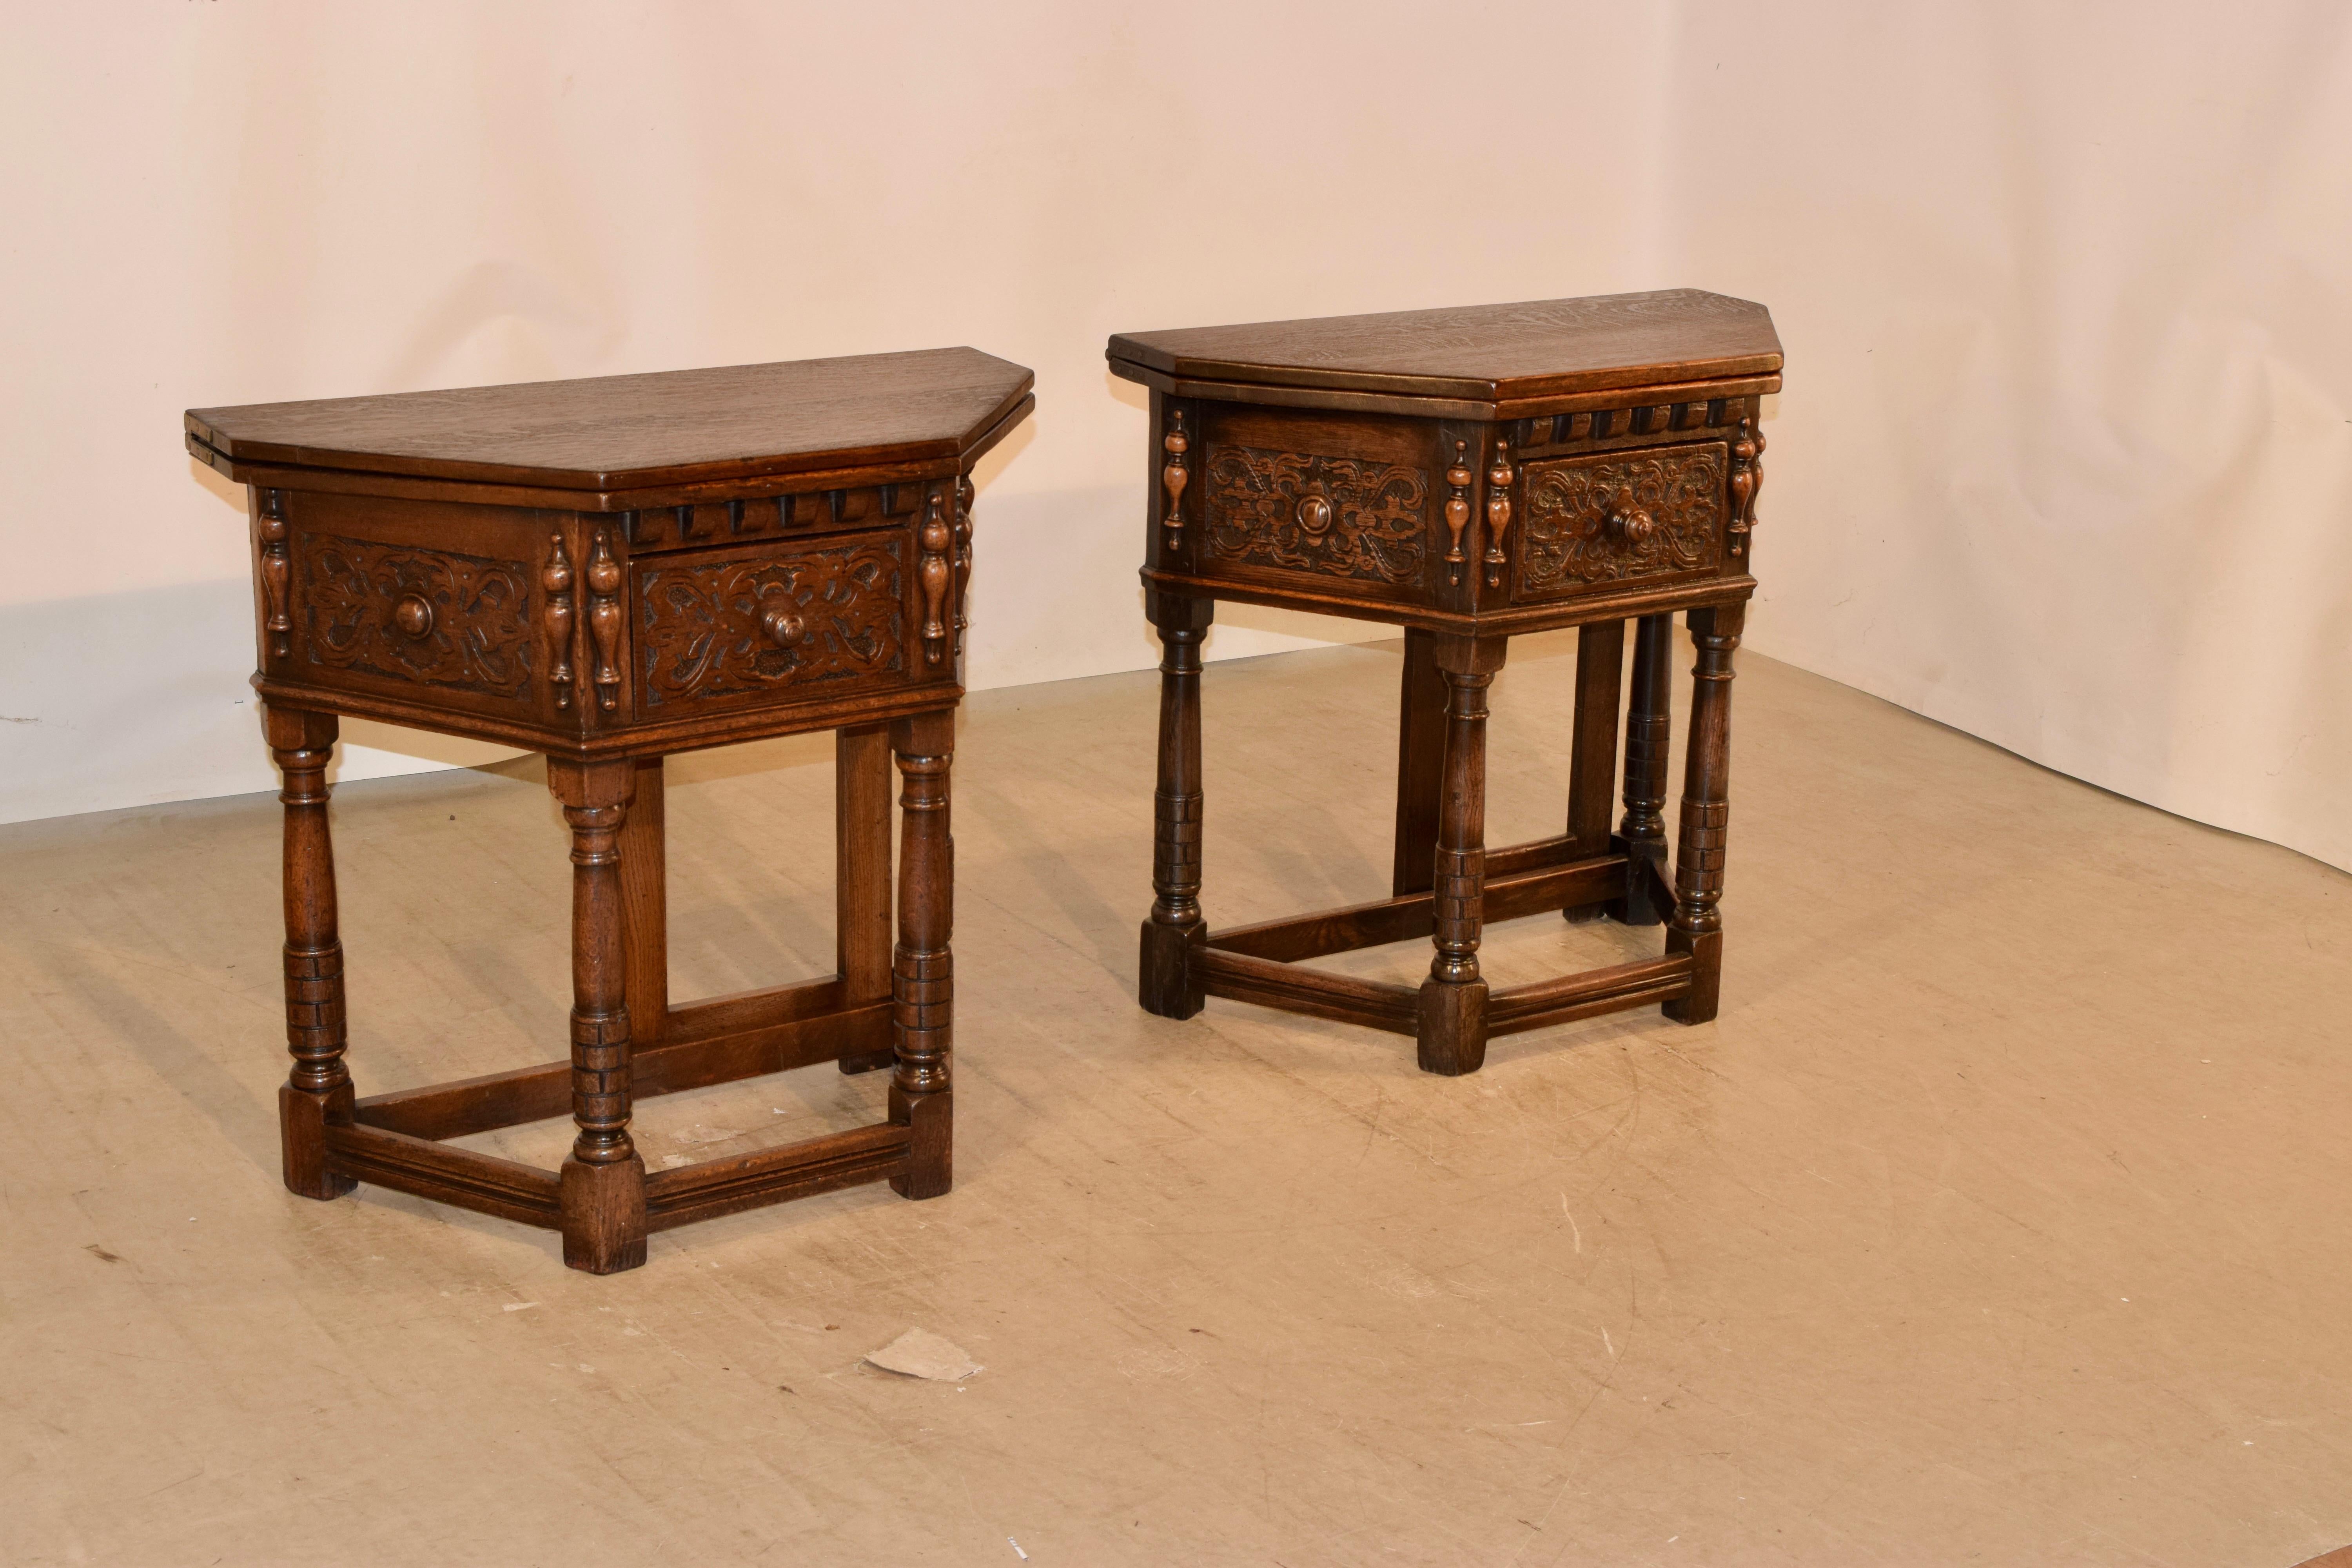 Pair of wonderful 19th century oak console tables from England. The tops are wonderfully grained and open, with he use of a gate leg in the back to an octagonal table top, which is very versatile for any situation. The aprons are heavily hand carved